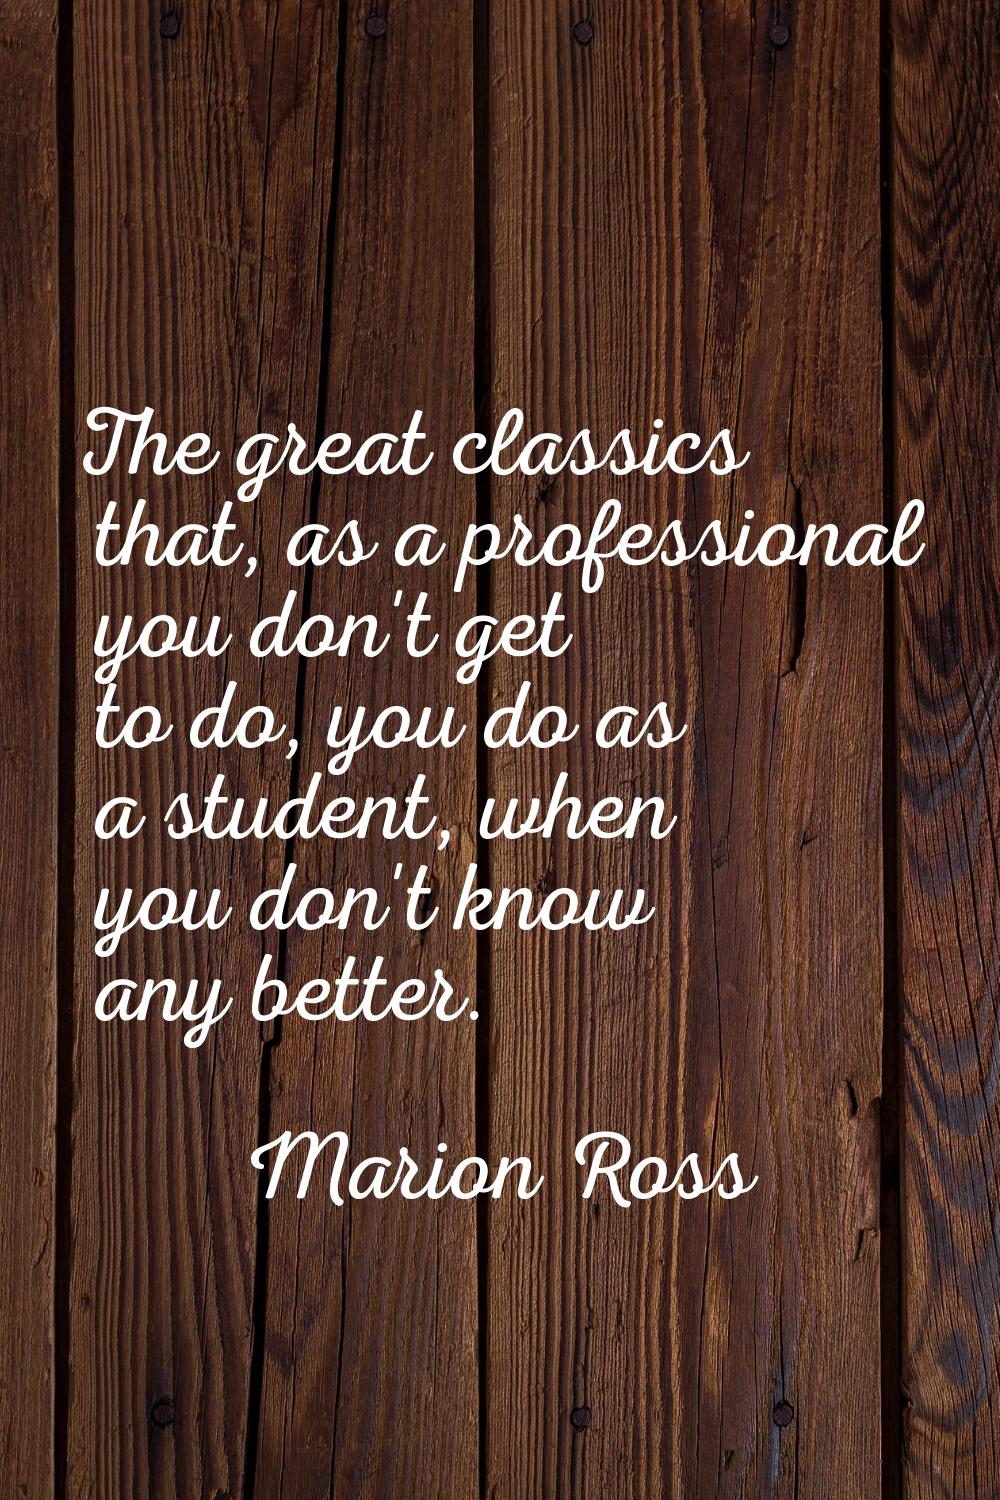 The great classics that, as a professional you don't get to do, you do as a student, when you don't